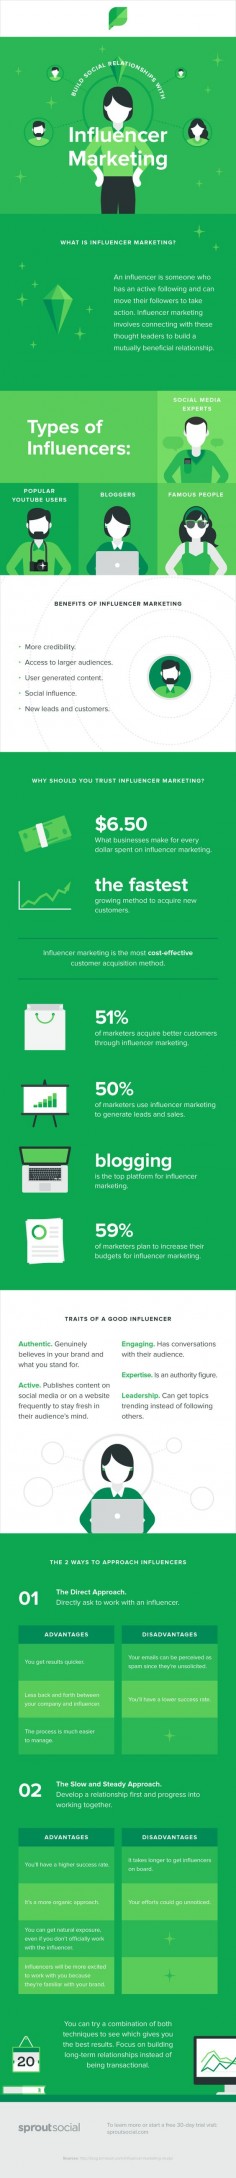 Build Social Media Relationships With Influencer Marketing - #infographic